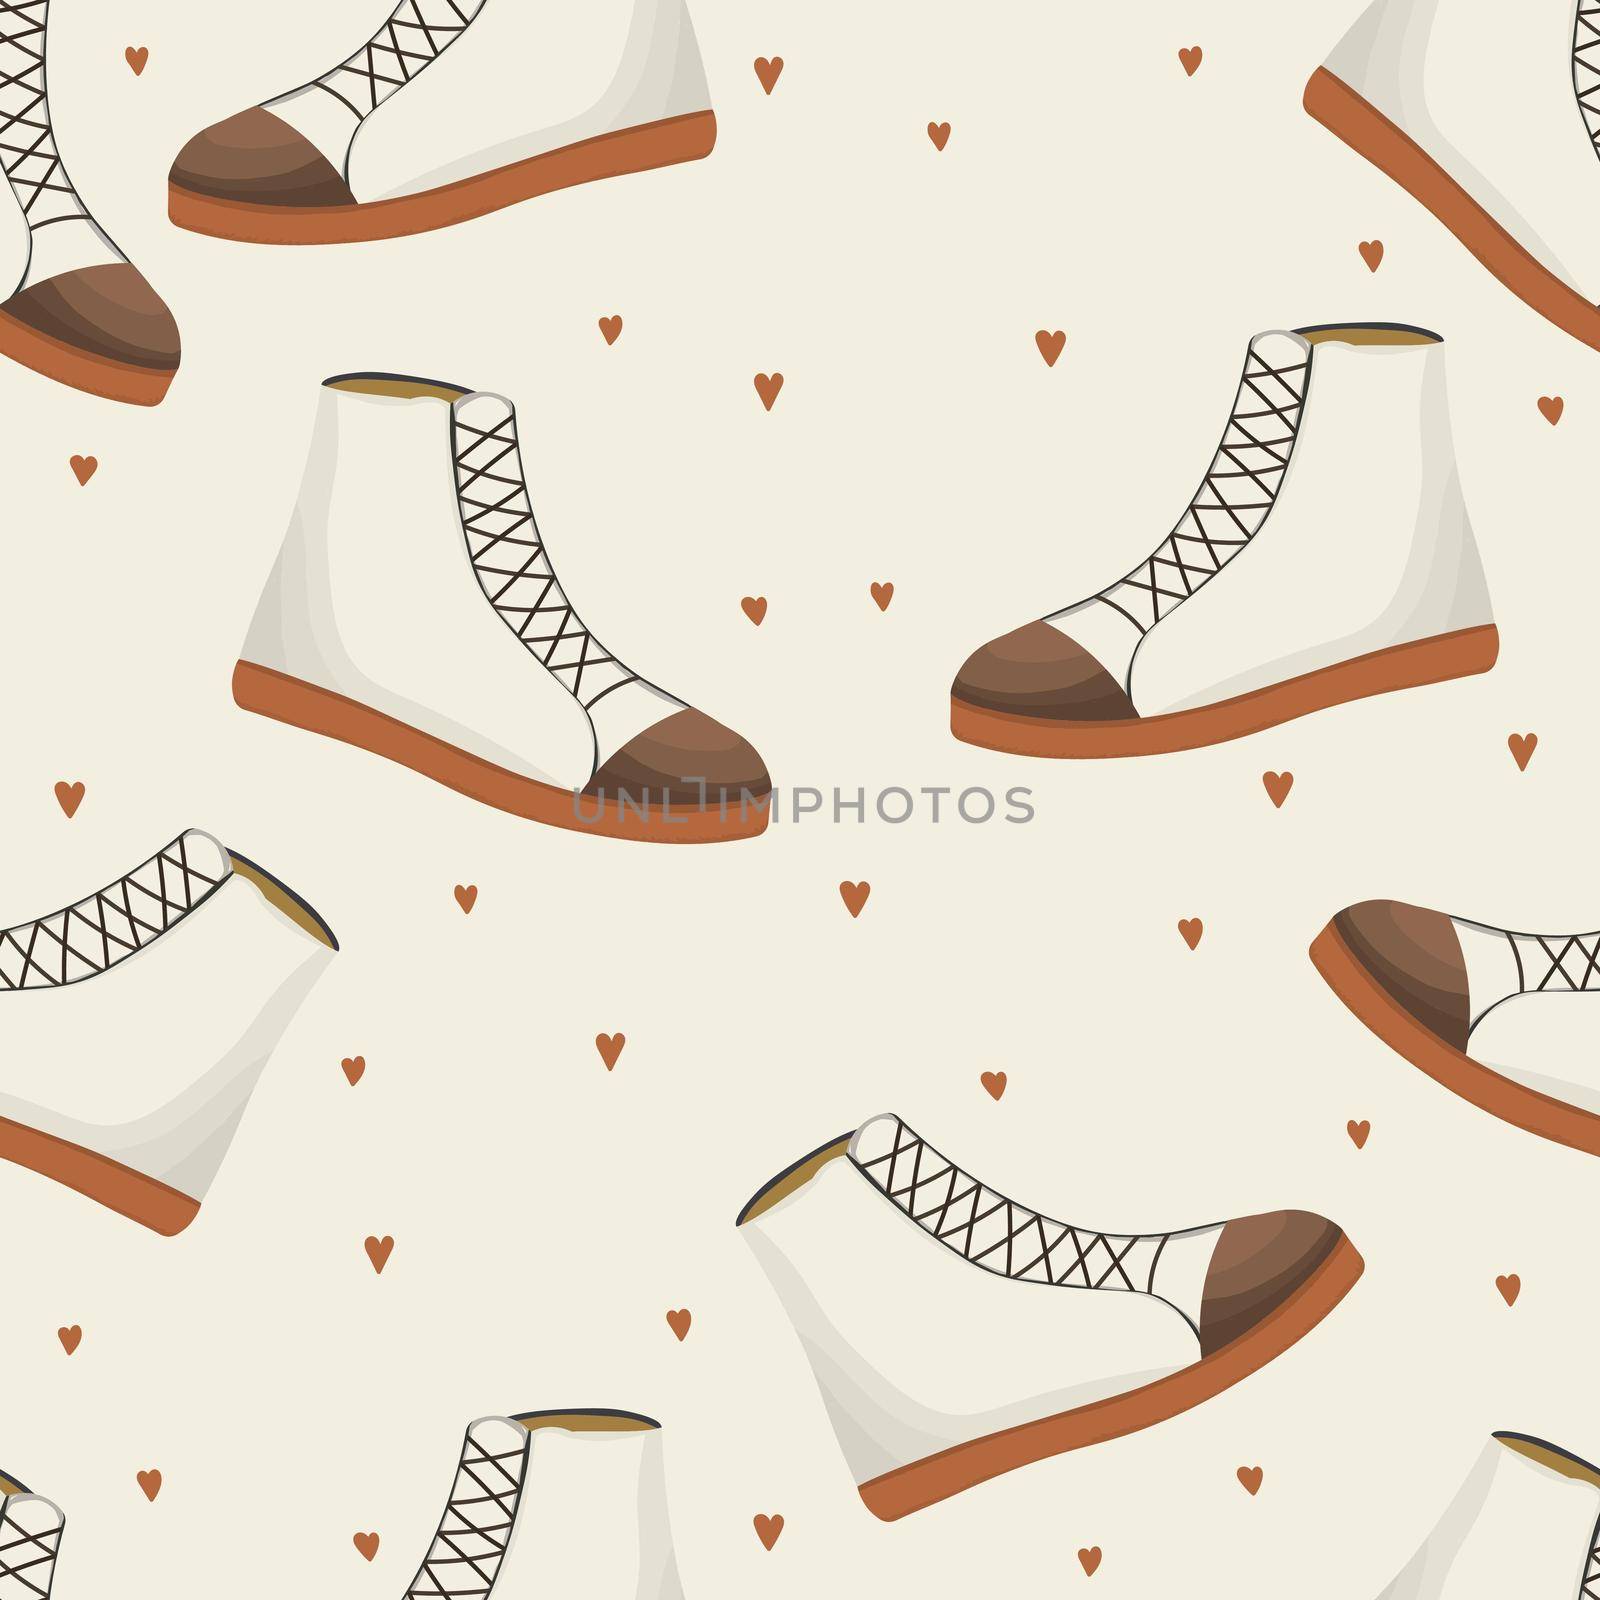 Seamless pattern with light beige womens shoes. Sneakers in flat style. Leather boots side view. Flat design. Youth modern model. Casual style. Vector illustration.